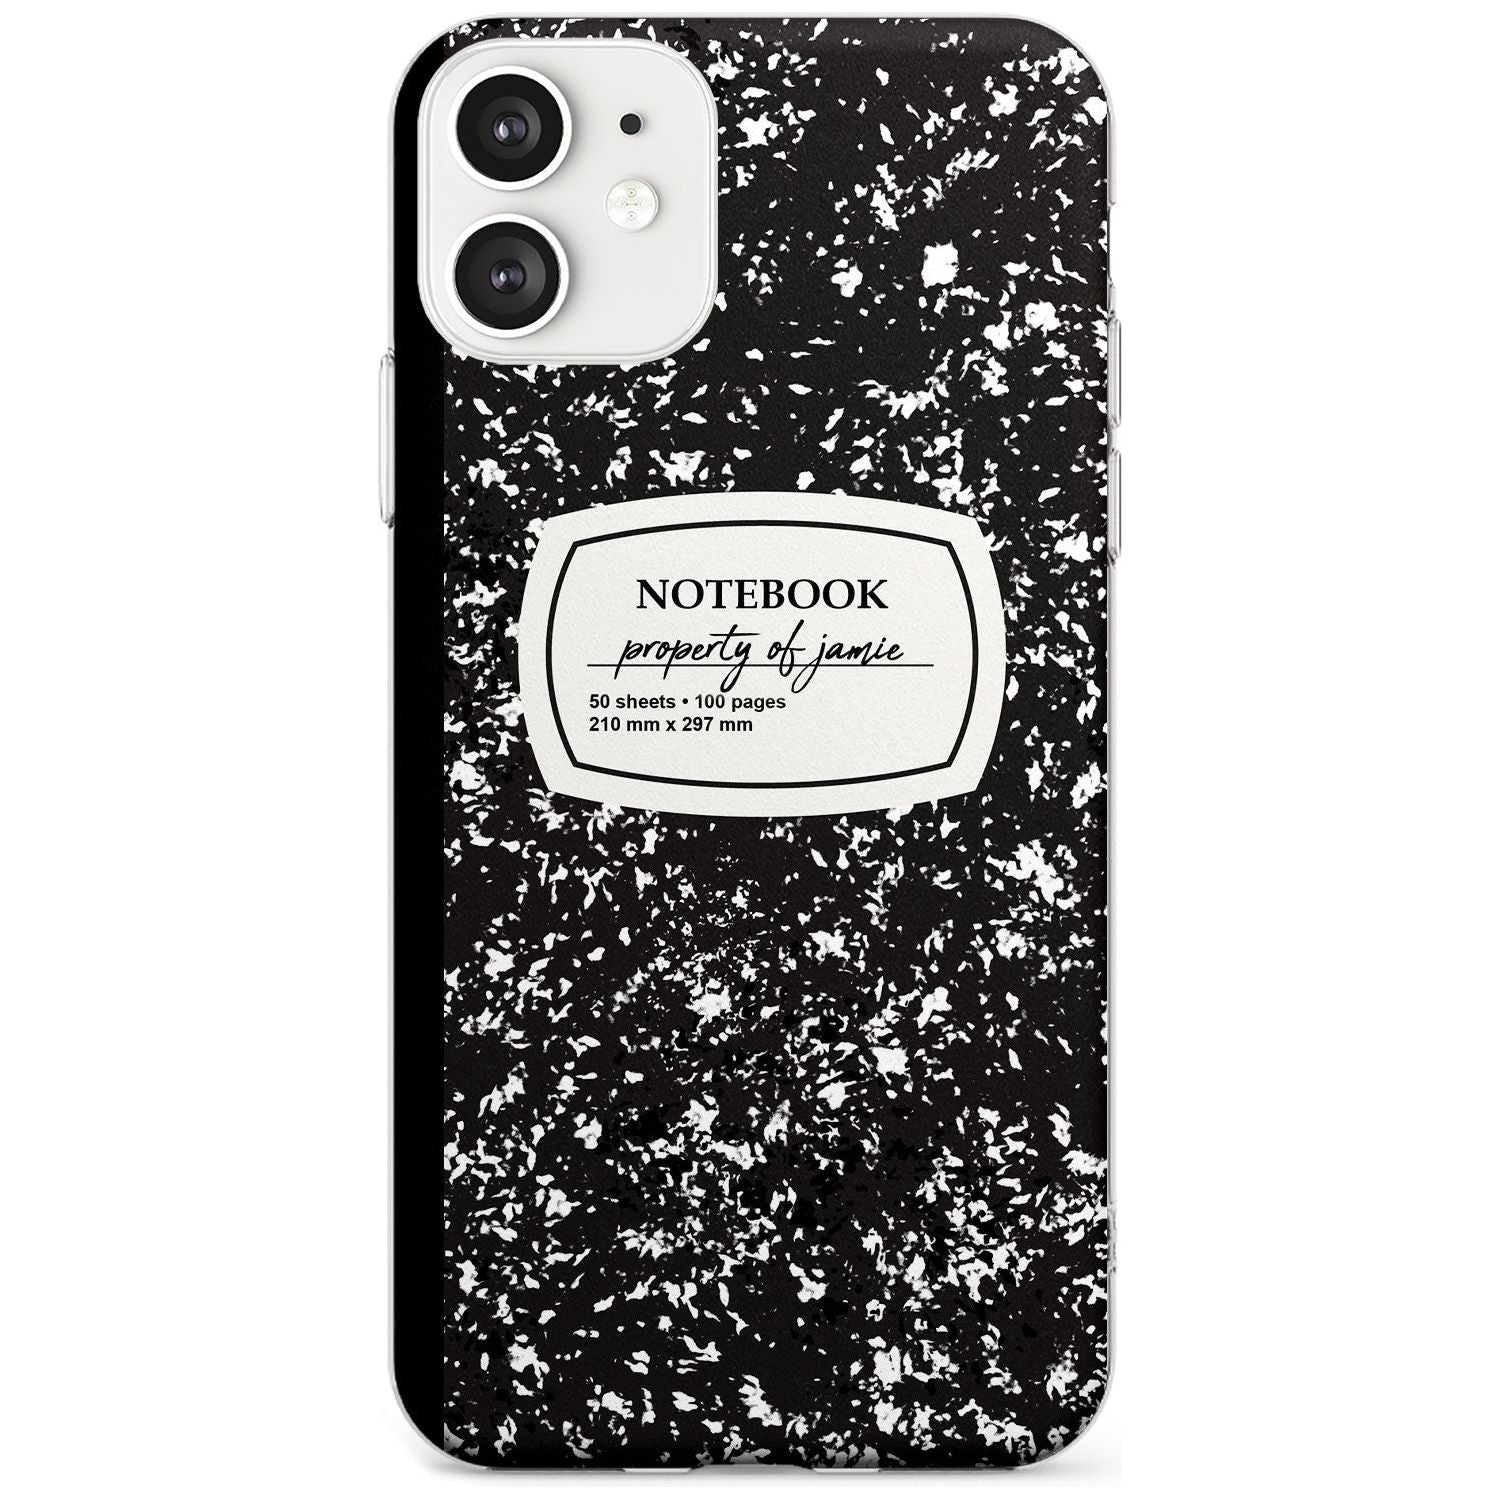 Custom Notebook Cover Black Impact Phone Case for iPhone 11